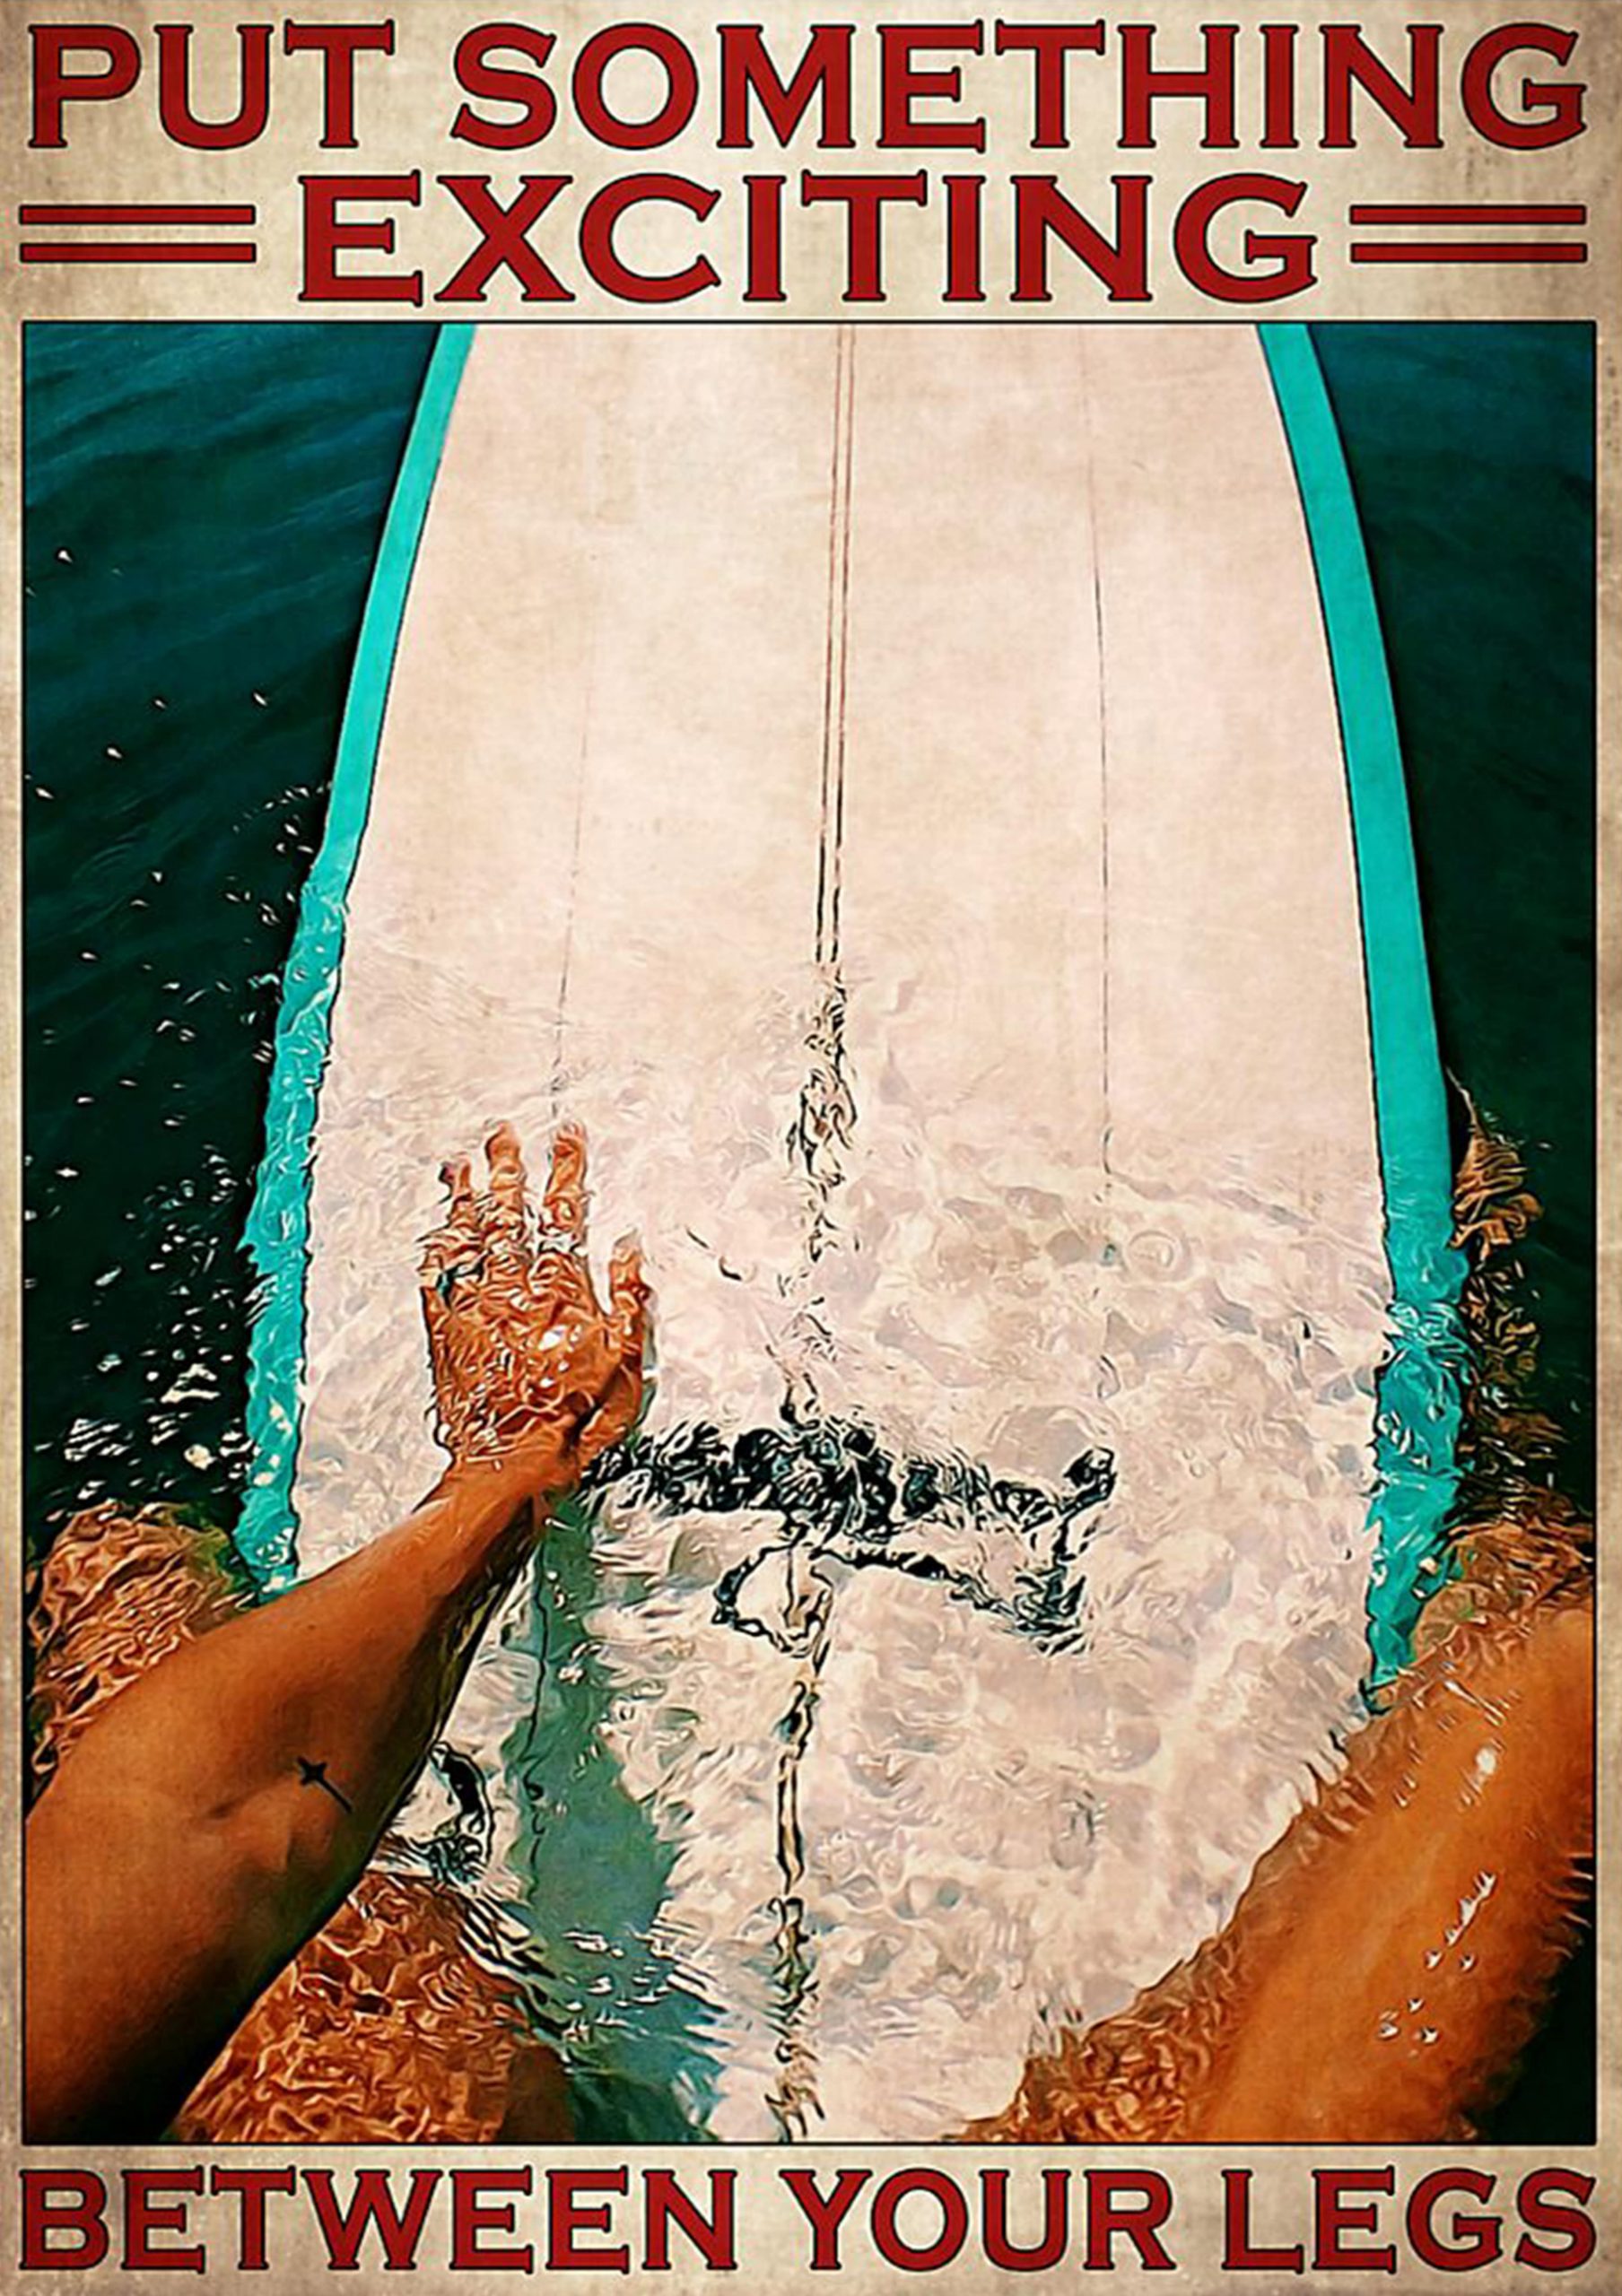 vintage surfing put something exciting between your legs poster 1 - Copy (2)